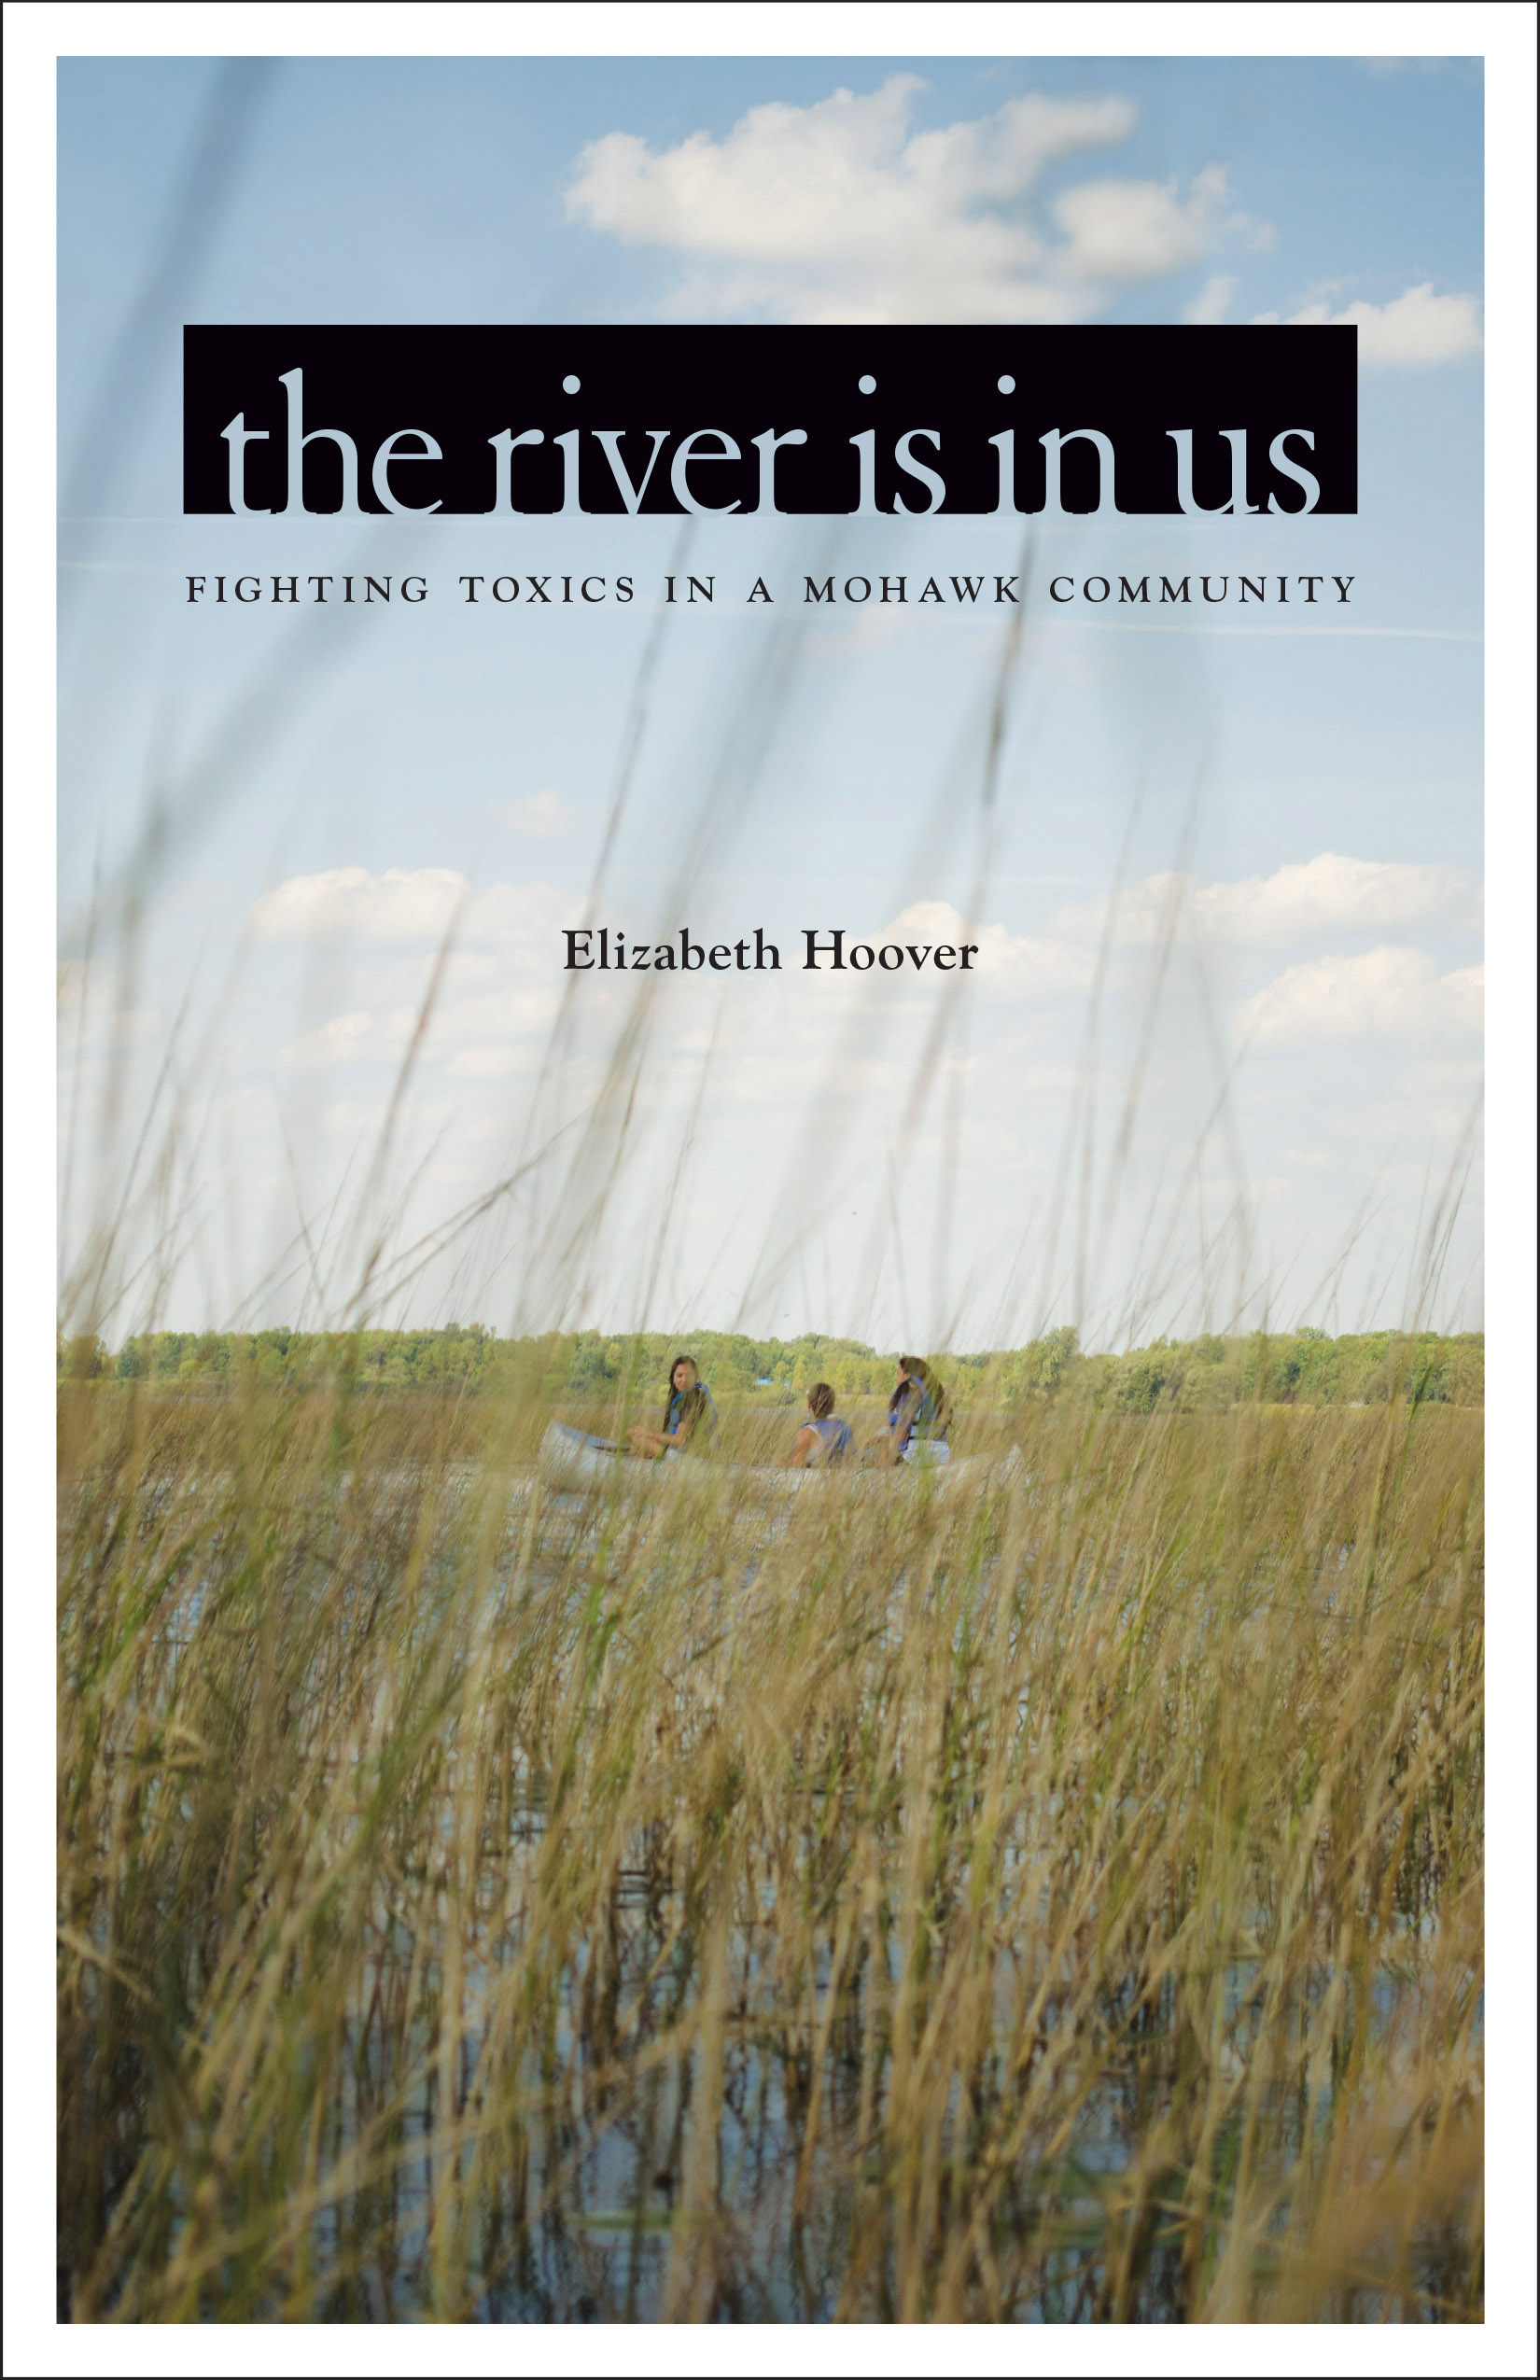 The River Is in Us (2017, University of Minnesota Press)